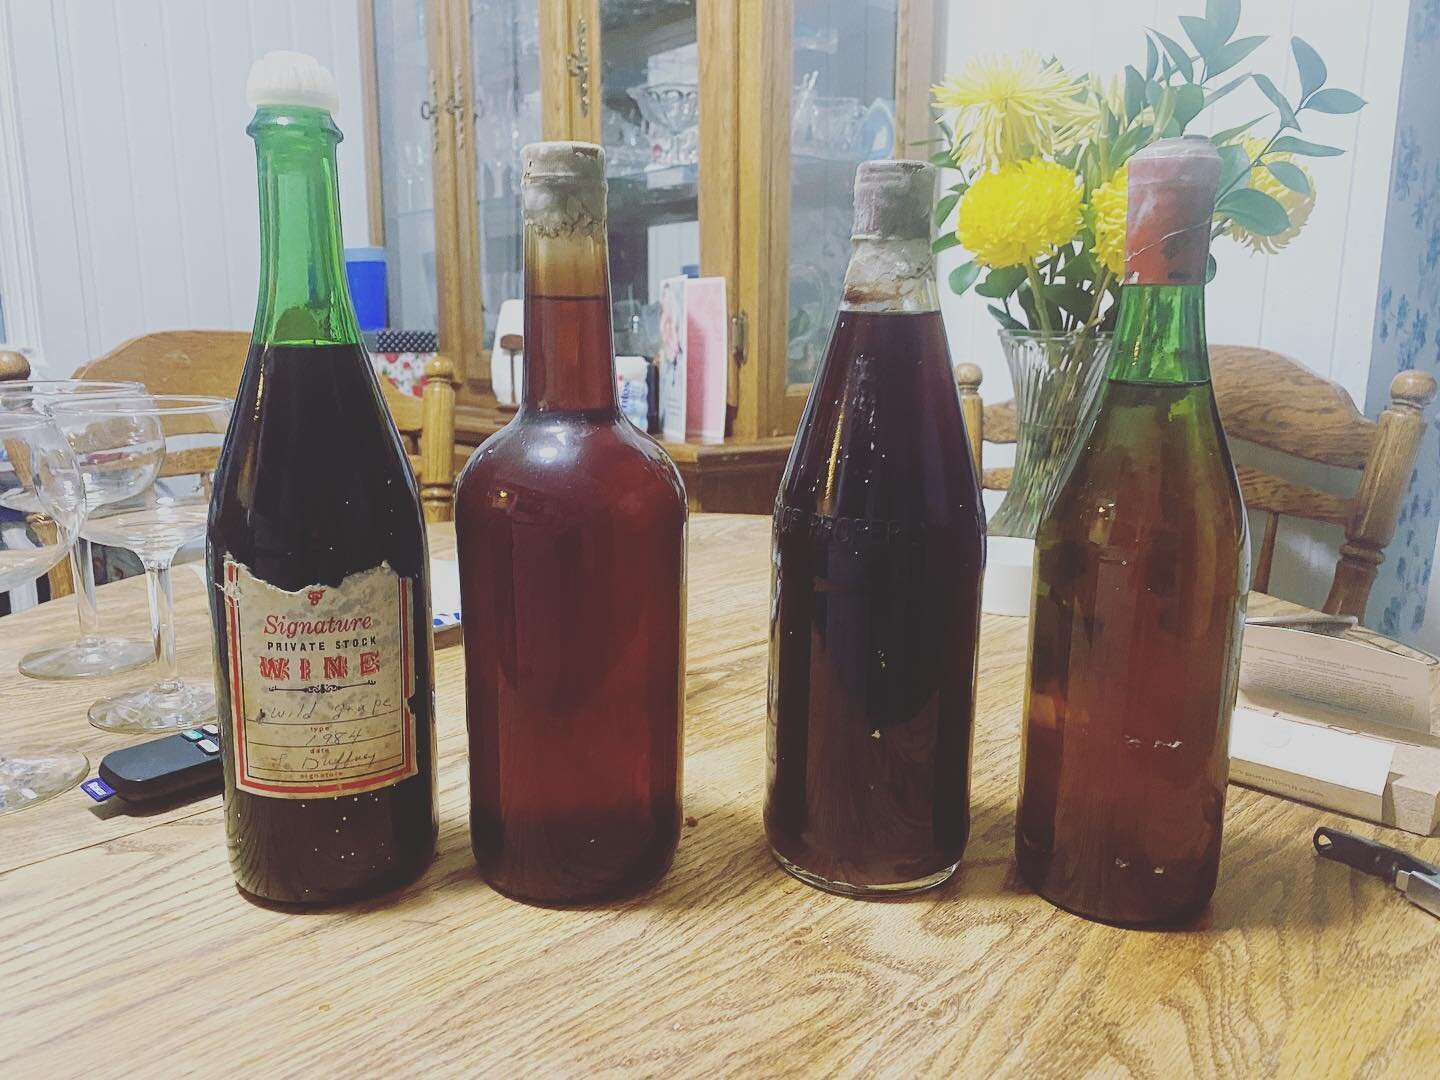 The wine my Dad made in the early 70s and the wine my Great-Uncle Leonard made in 1984